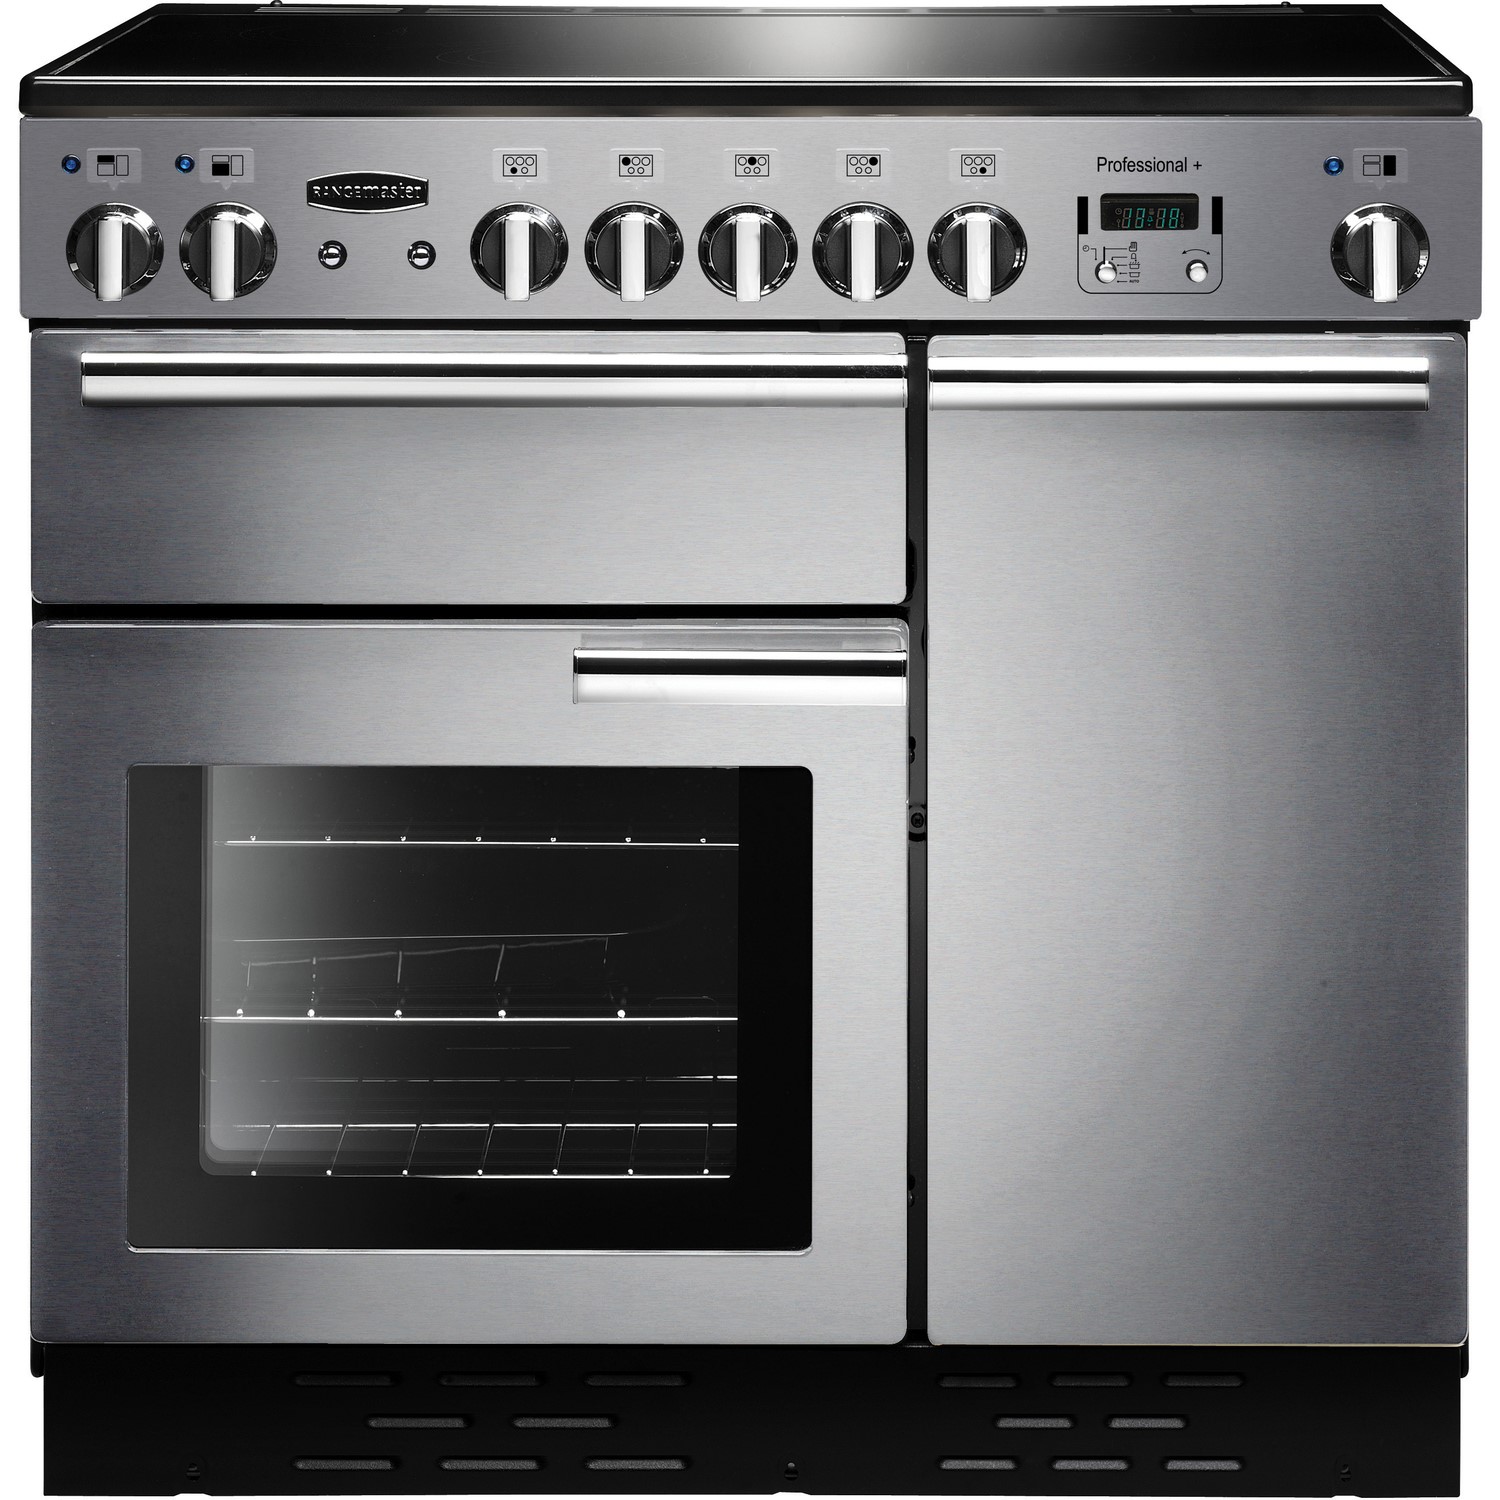 Rangemaster Professional Plus 90cm Electric Range Cooker with Induction Hob - Stainless Steel